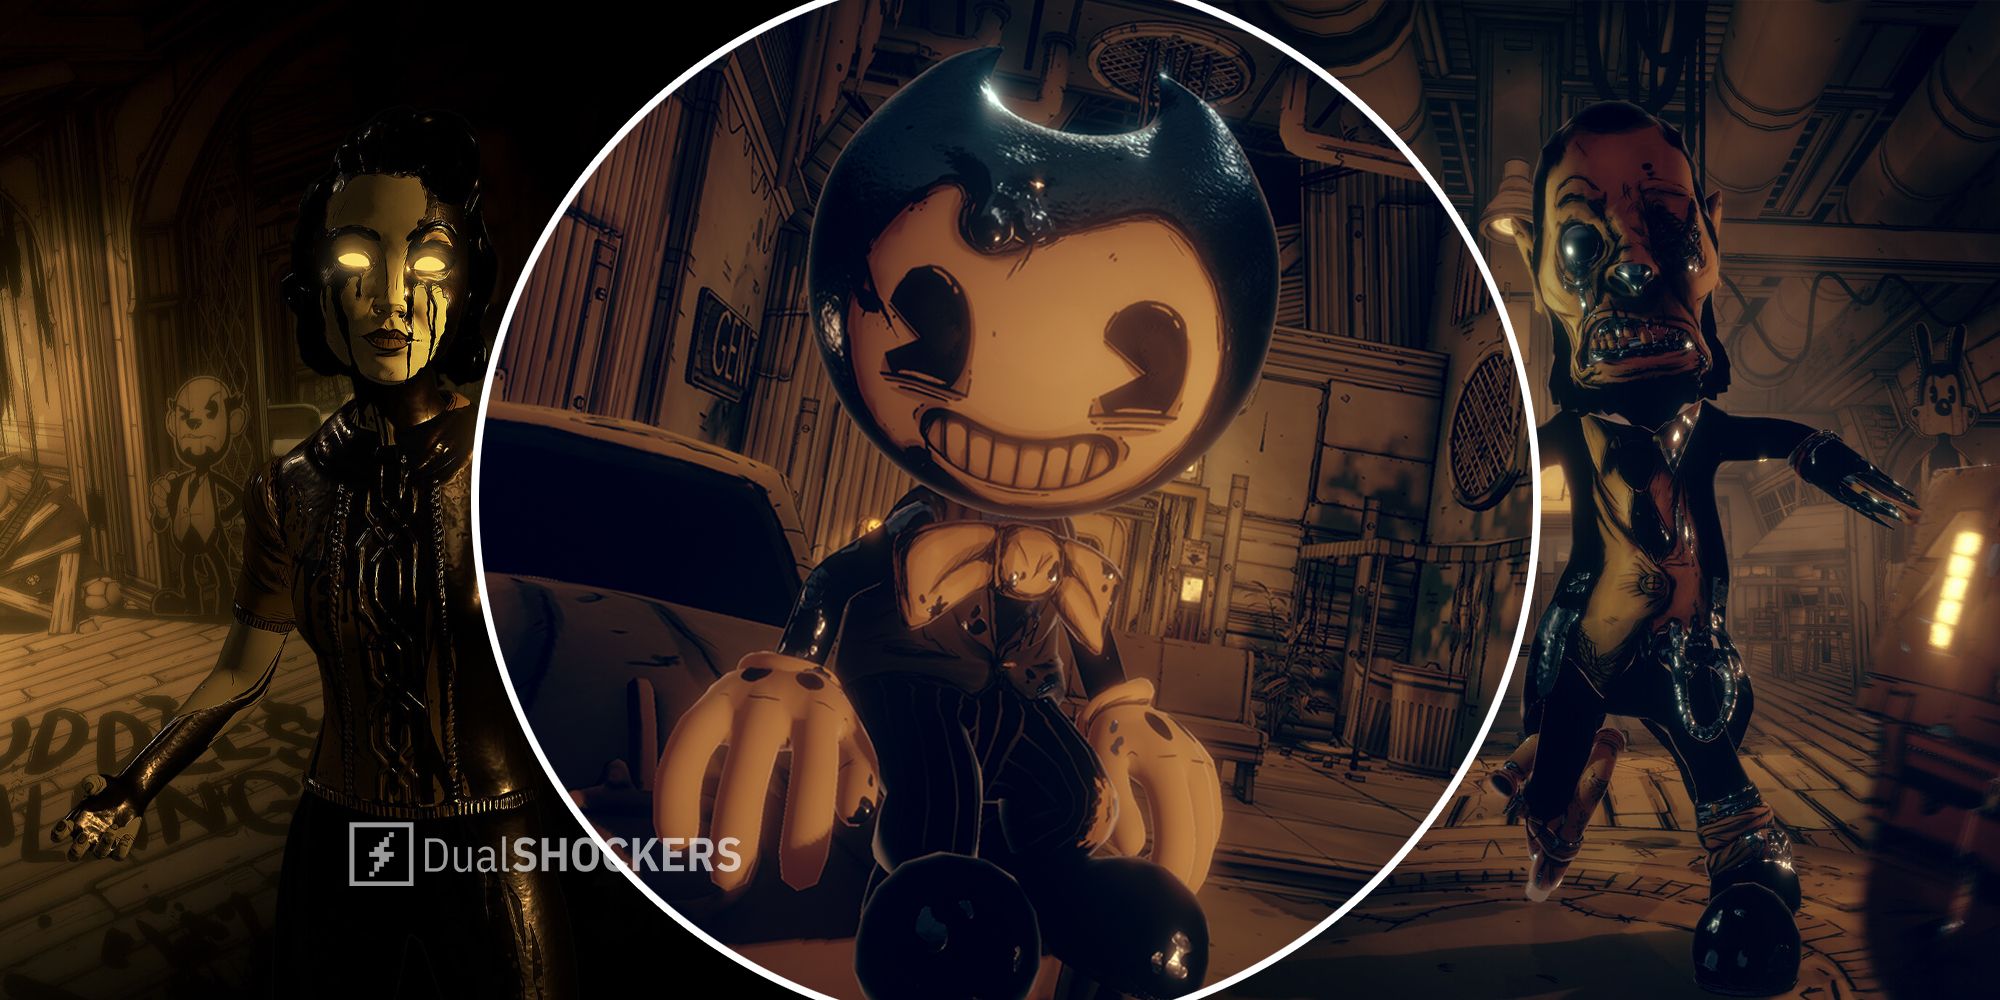 Bendy & The Dark Revival Reveals New Launch Date